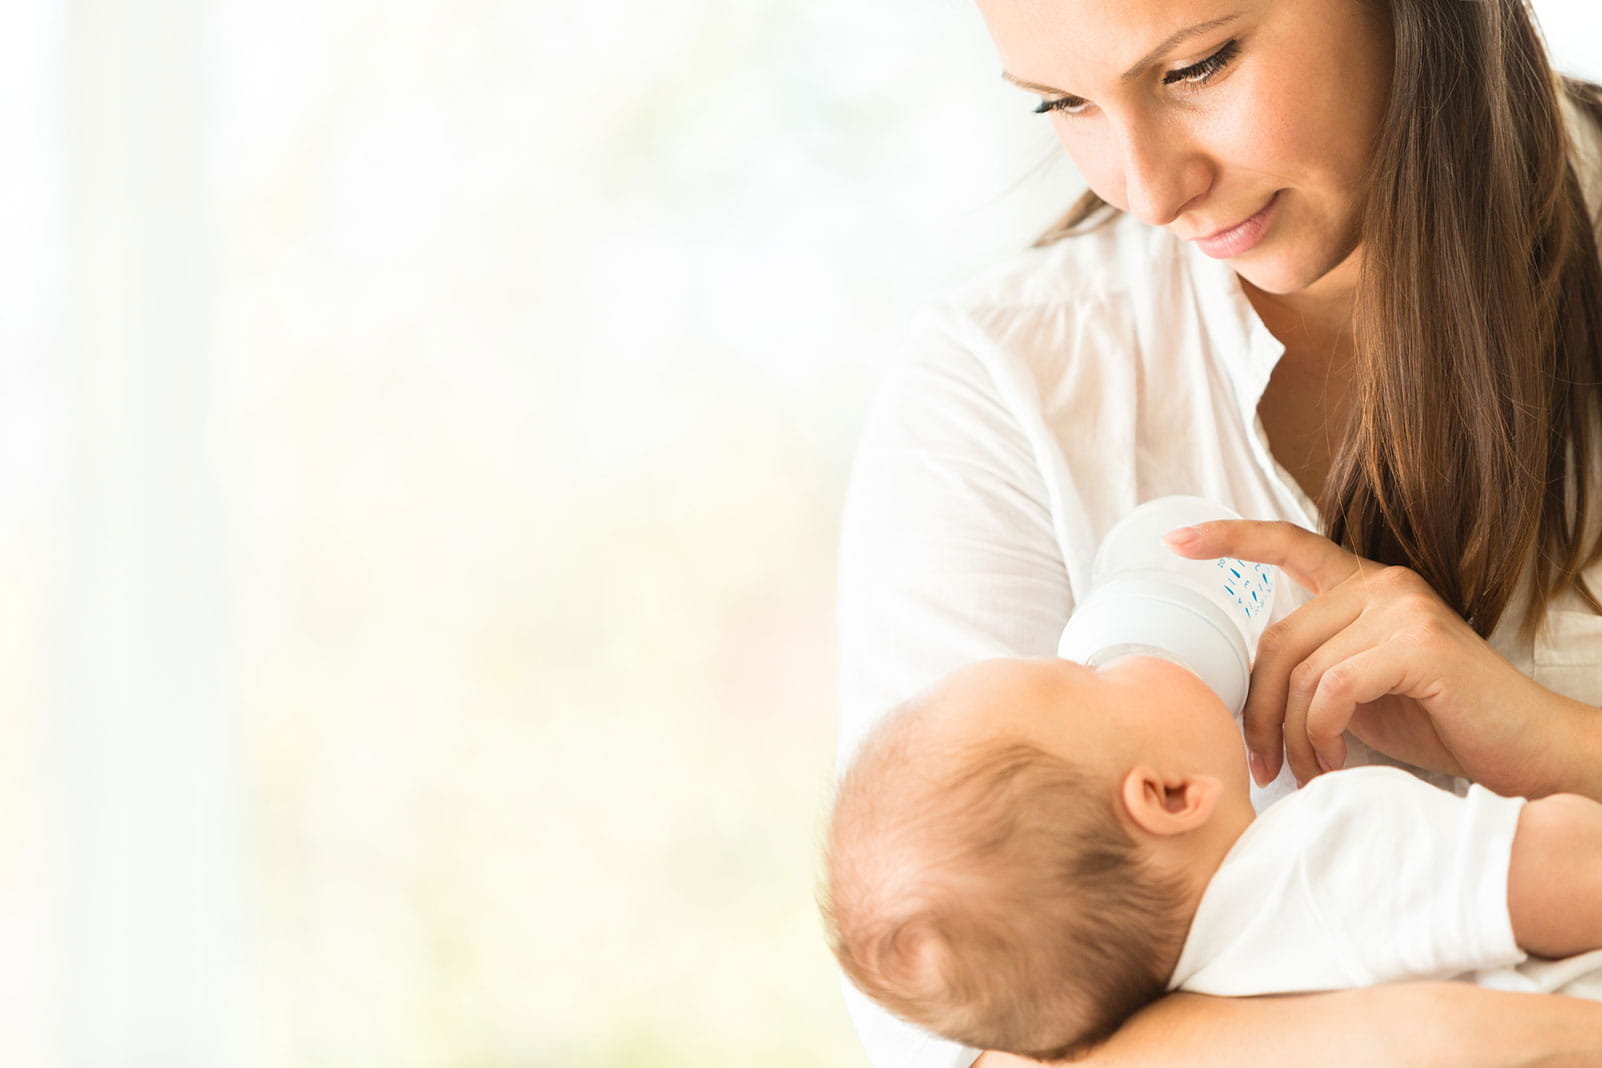 FAQs: What to Do to Stop Breastfeeding